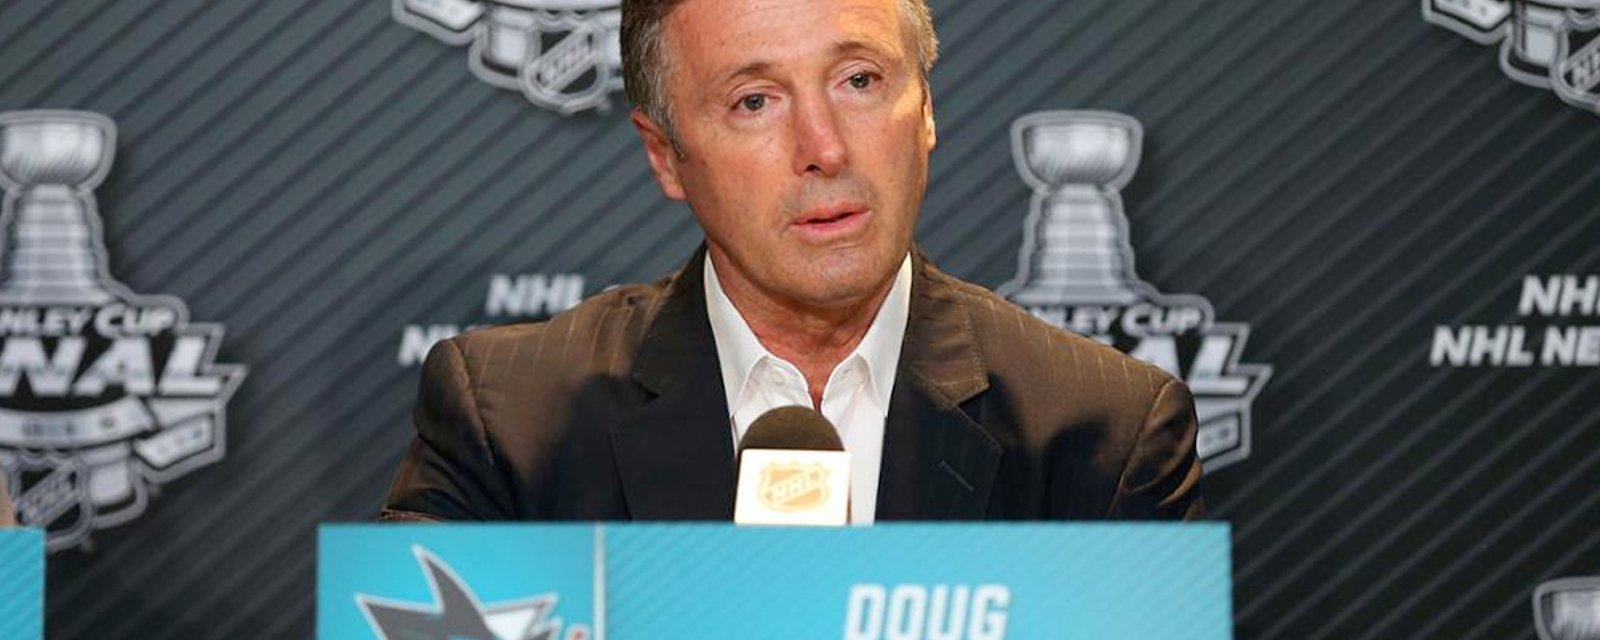 Sharks GM Doug Wilson just made the best free agent signing of the offseason